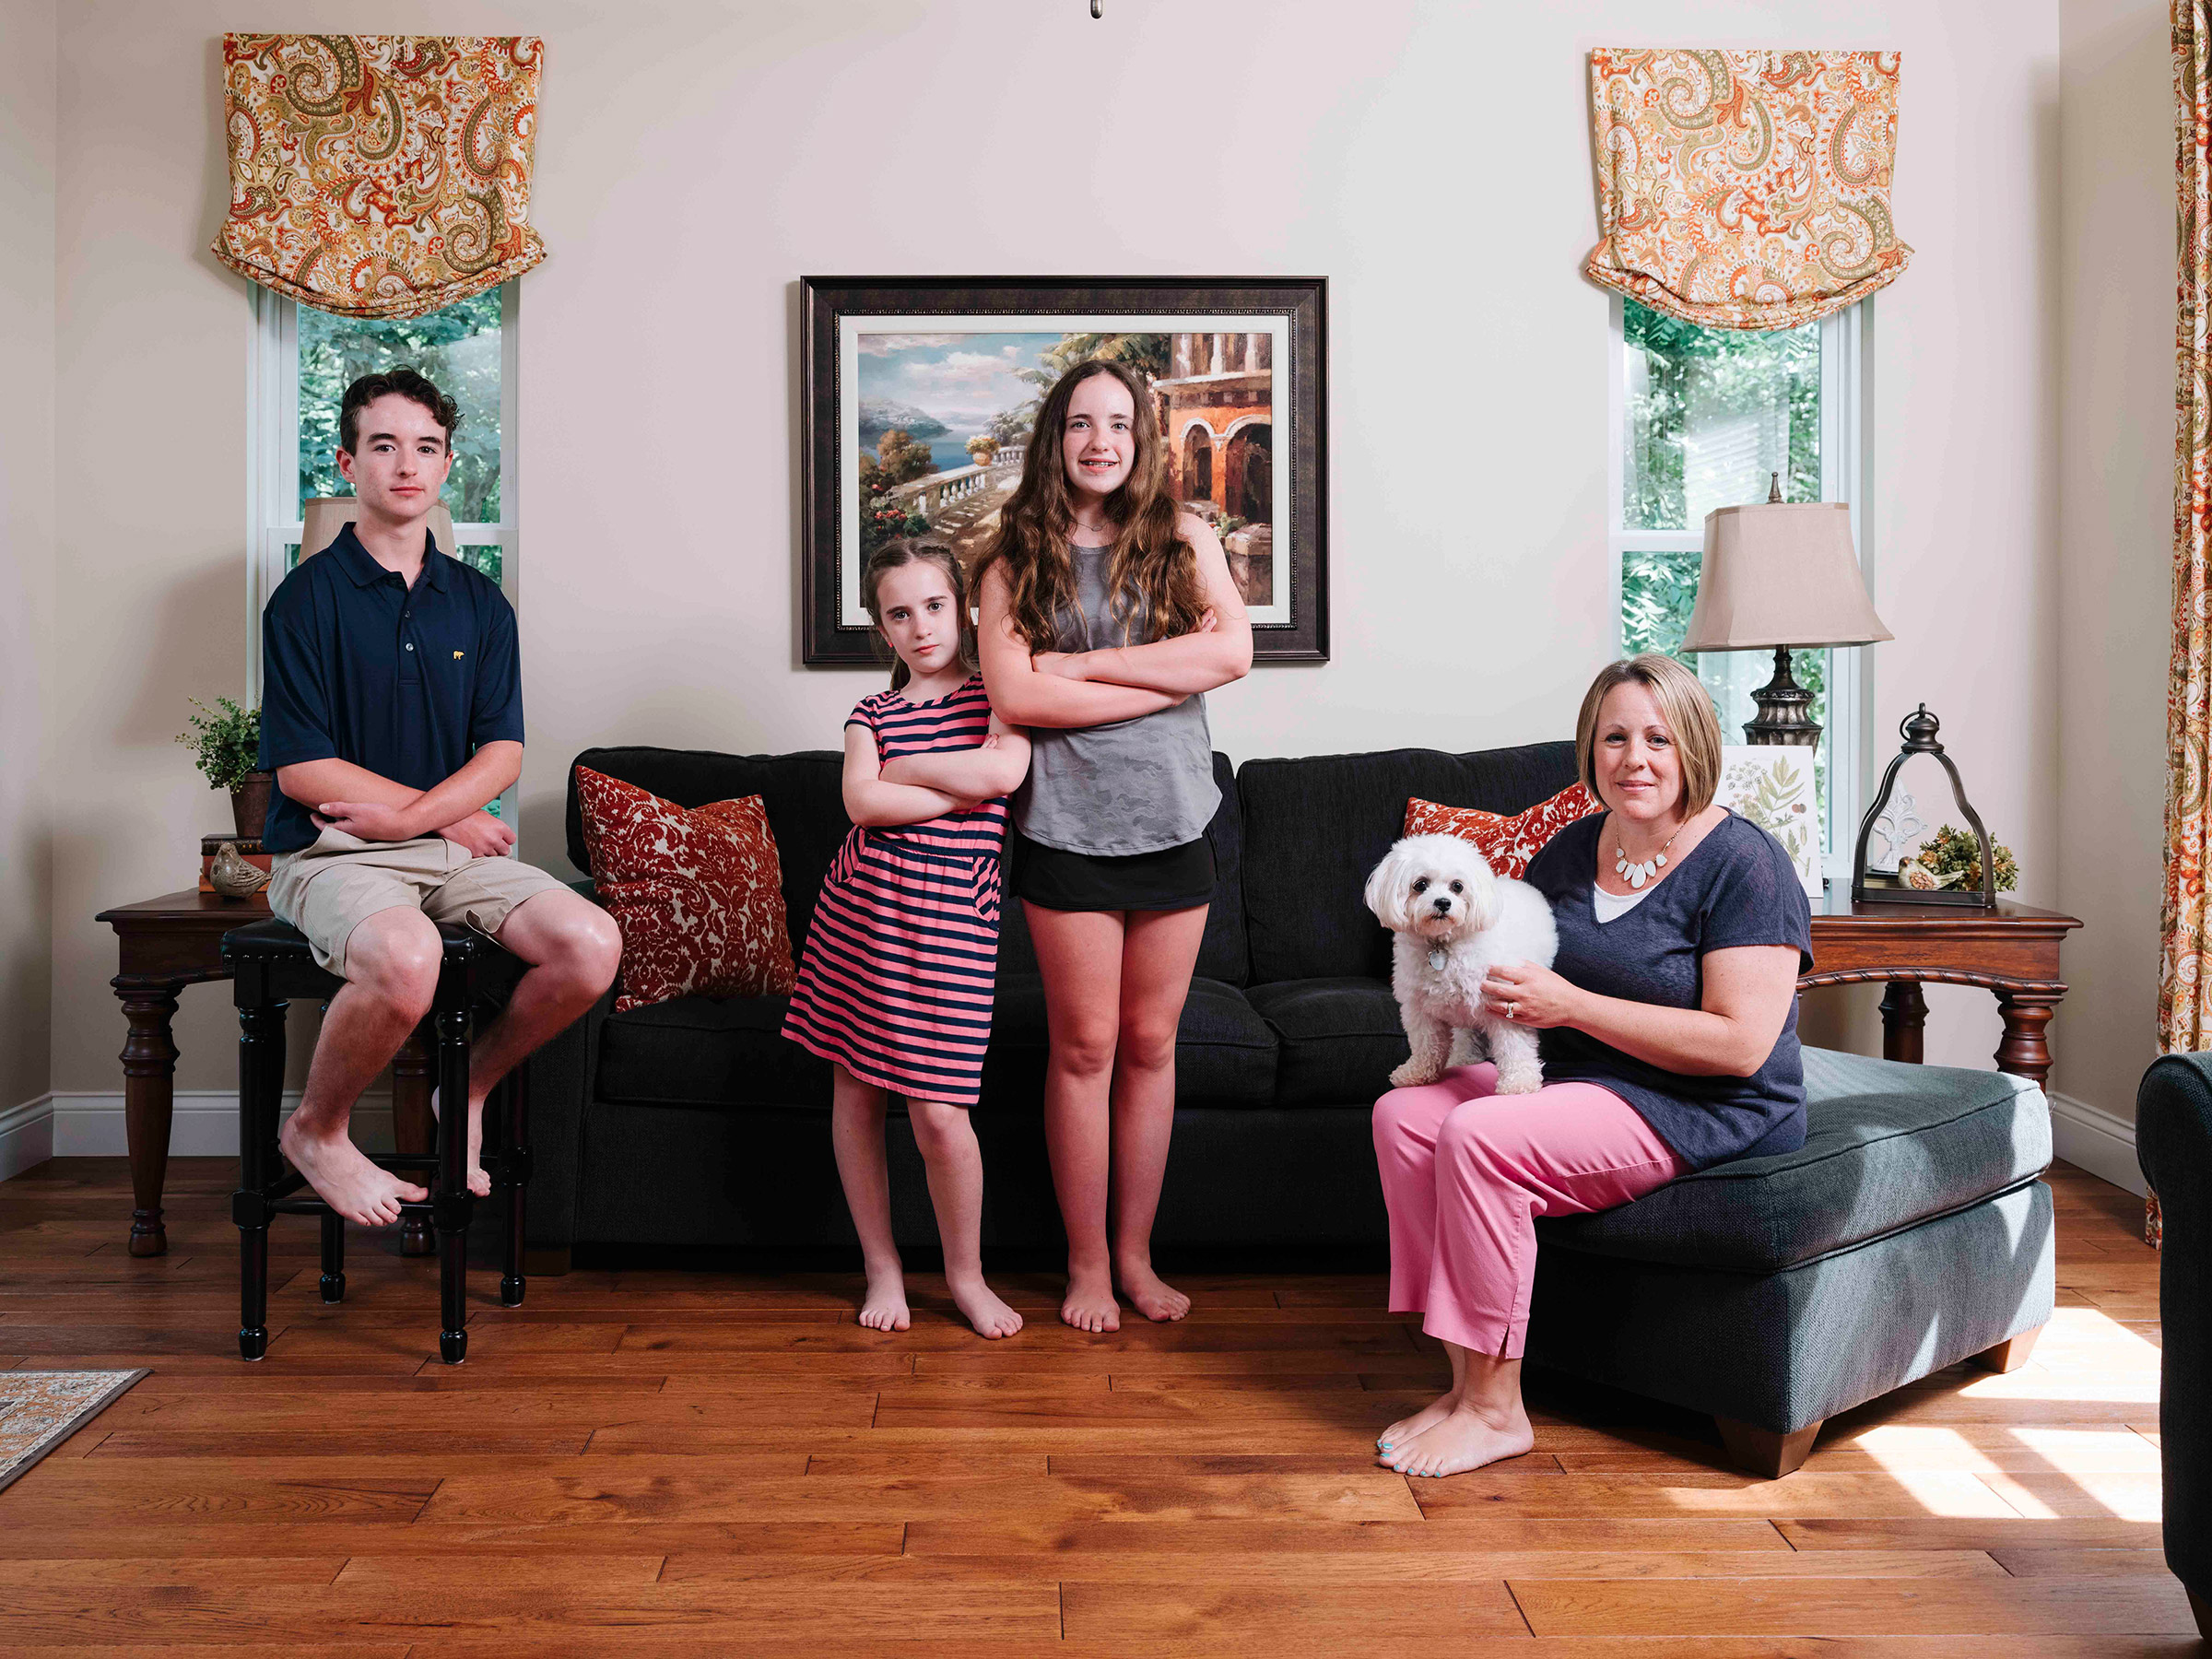 "I just think [critical race theory] disregards the idea that all people are created equal." Shauna Poggio, Rockwood parent, with her family (David Kasnic for TIME)